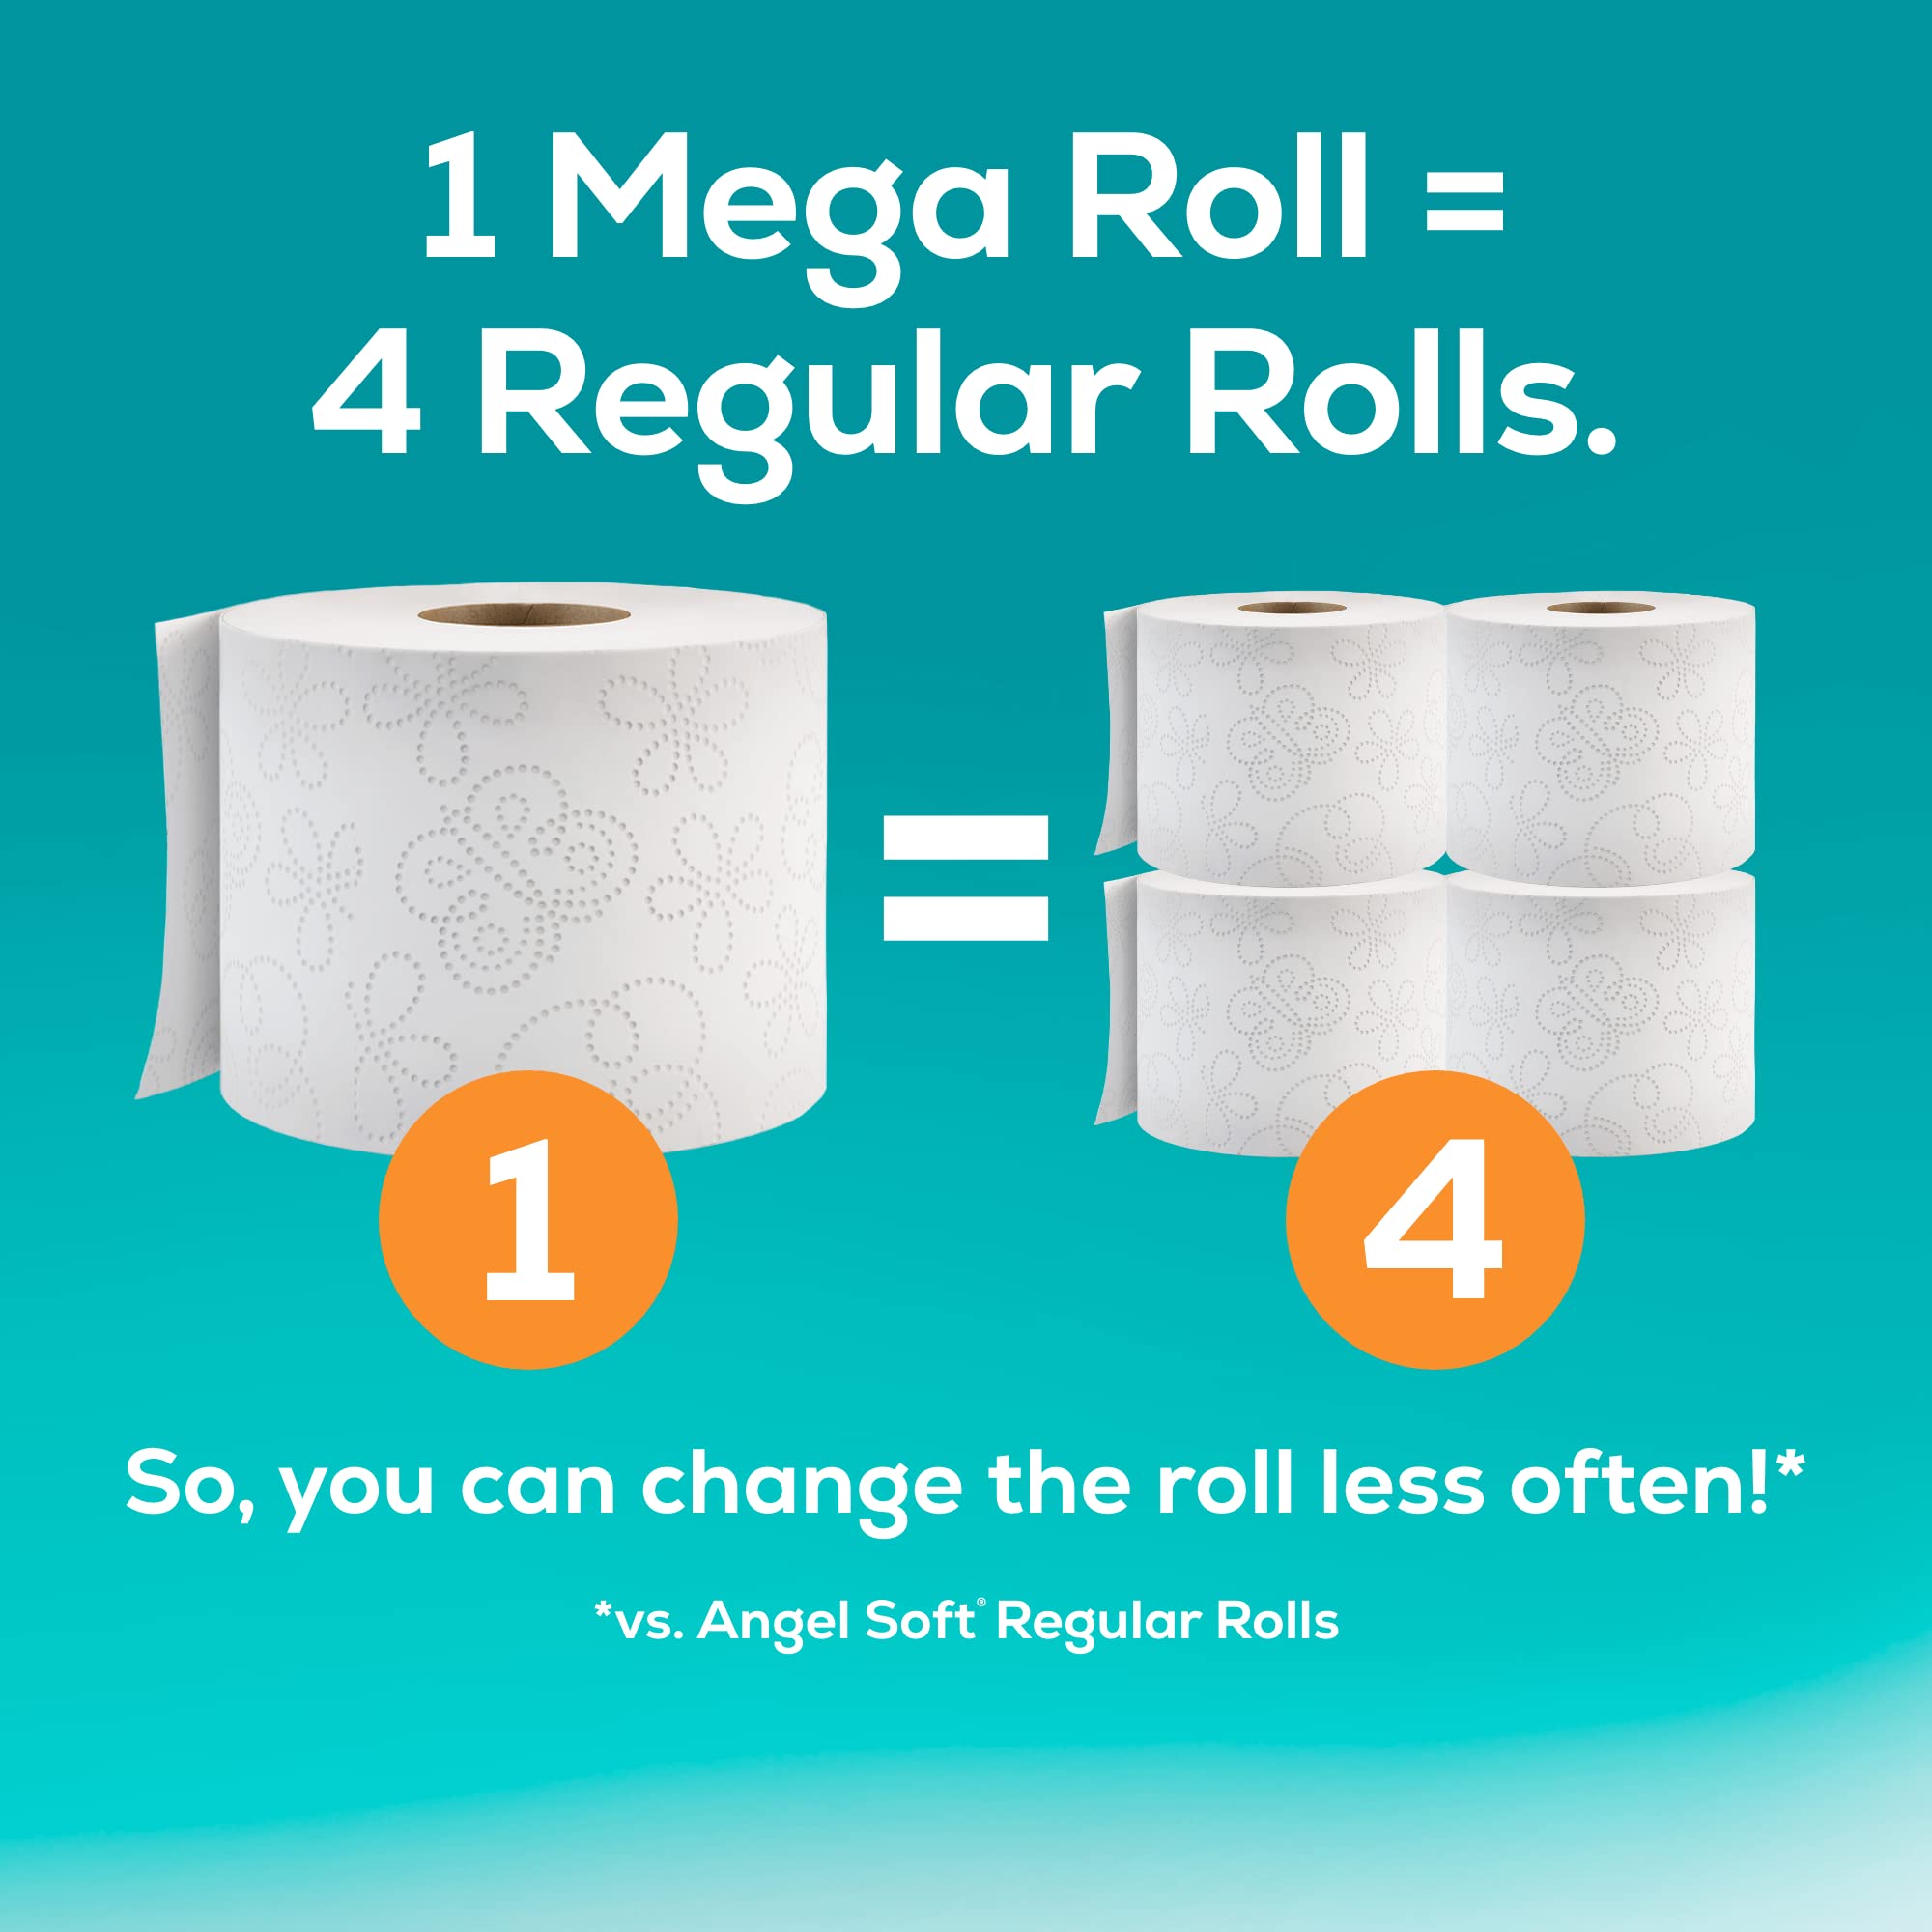 Angel Soft® Toilet Paper with Fresh Linen Scent, 8 Mega Rolls = 32 Regular Rolls, 320 Sheets each, 2-Ply Bath Tissue, 320 Count (Pack of 8)